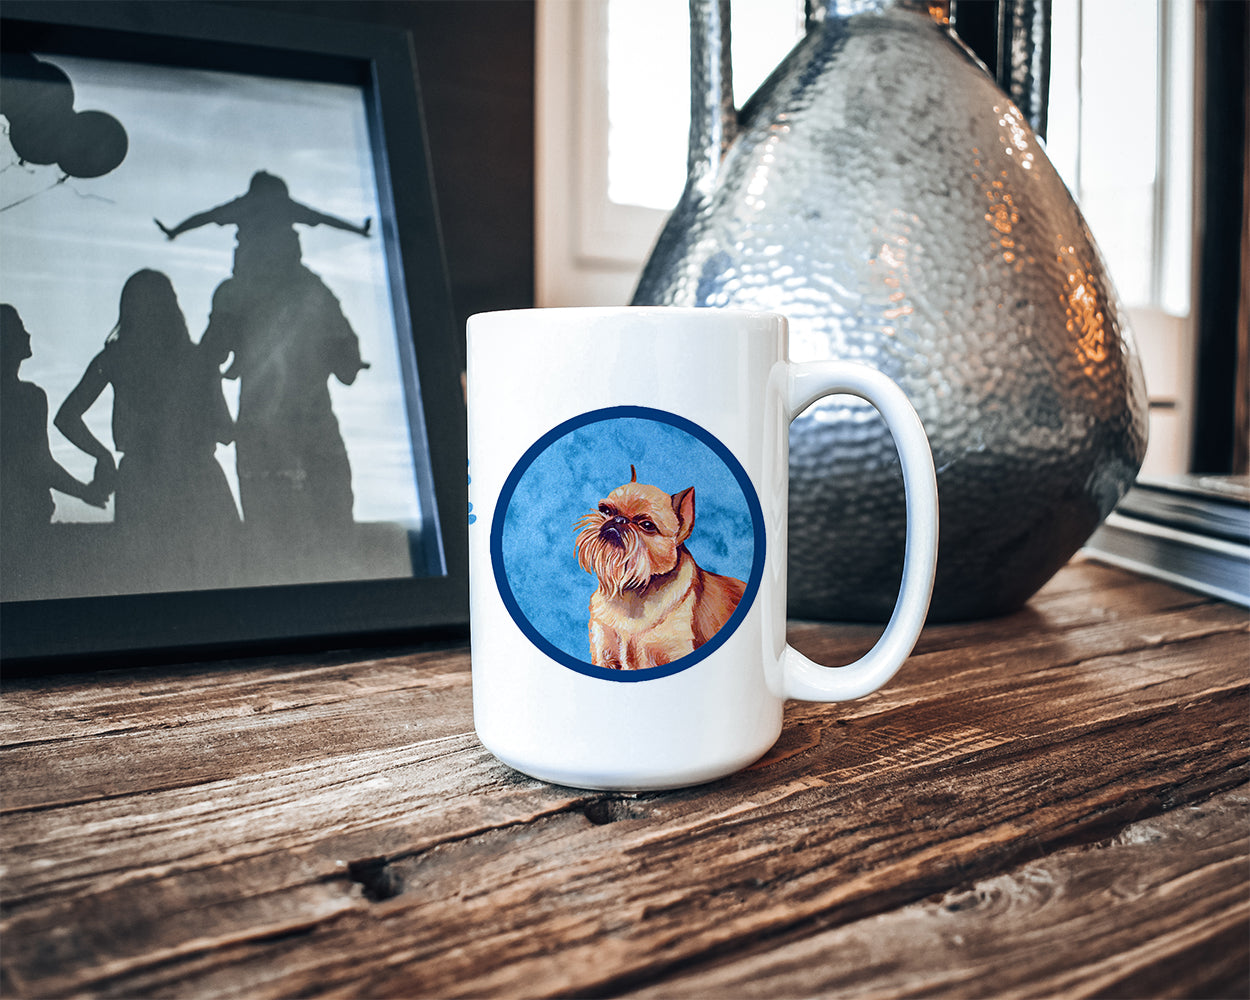 Brussels Griffon  Dishwasher Safe Microwavable Ceramic Coffee Mug 15 ounce  the-store.com.